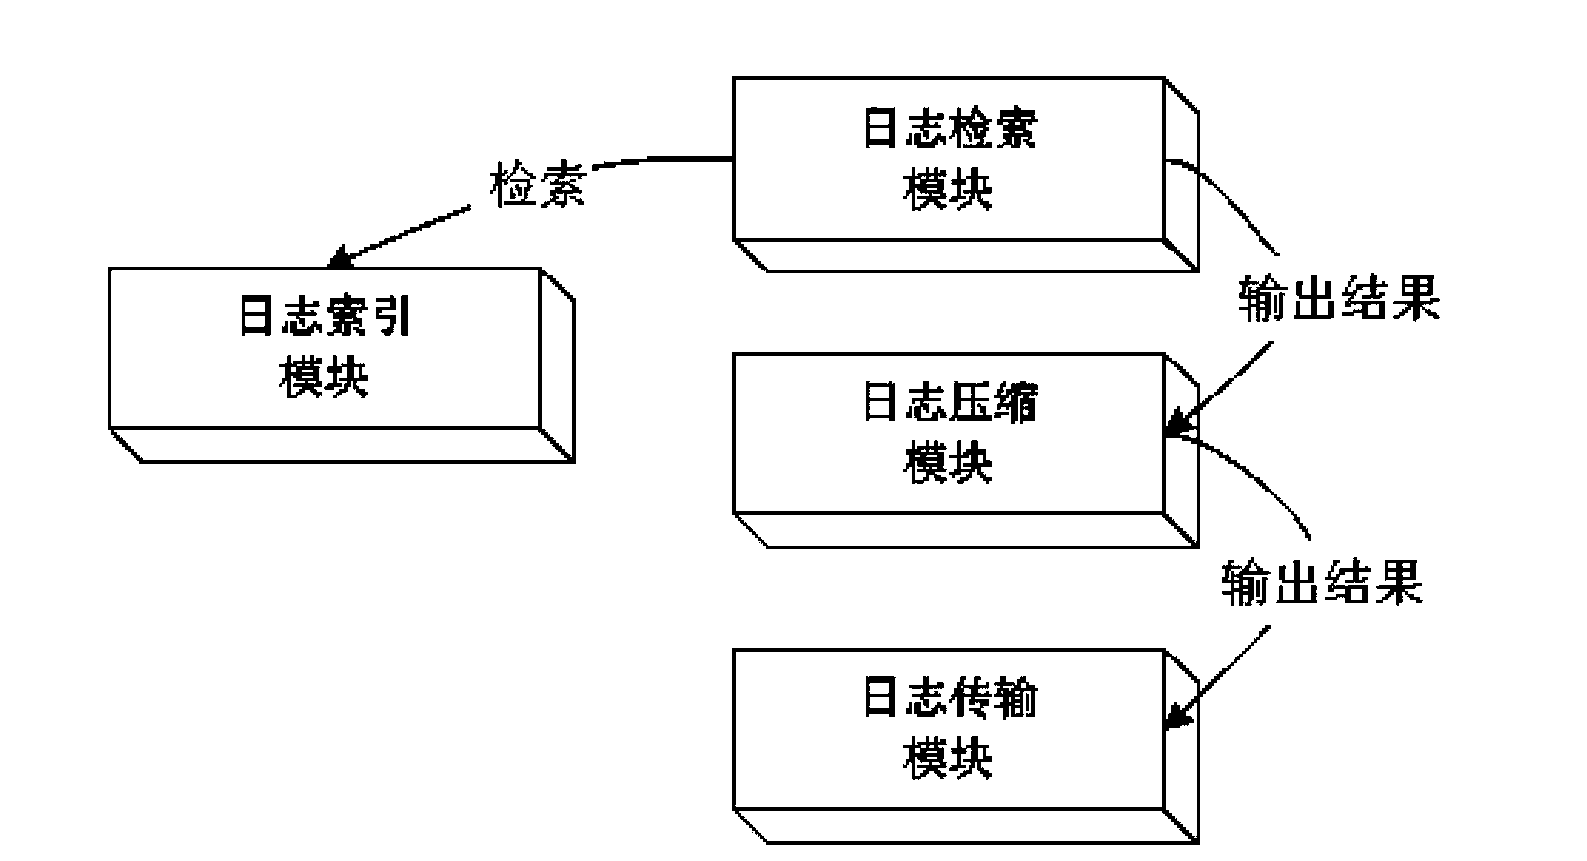 System and method for remotely collecting, retrieving and displaying application system logs